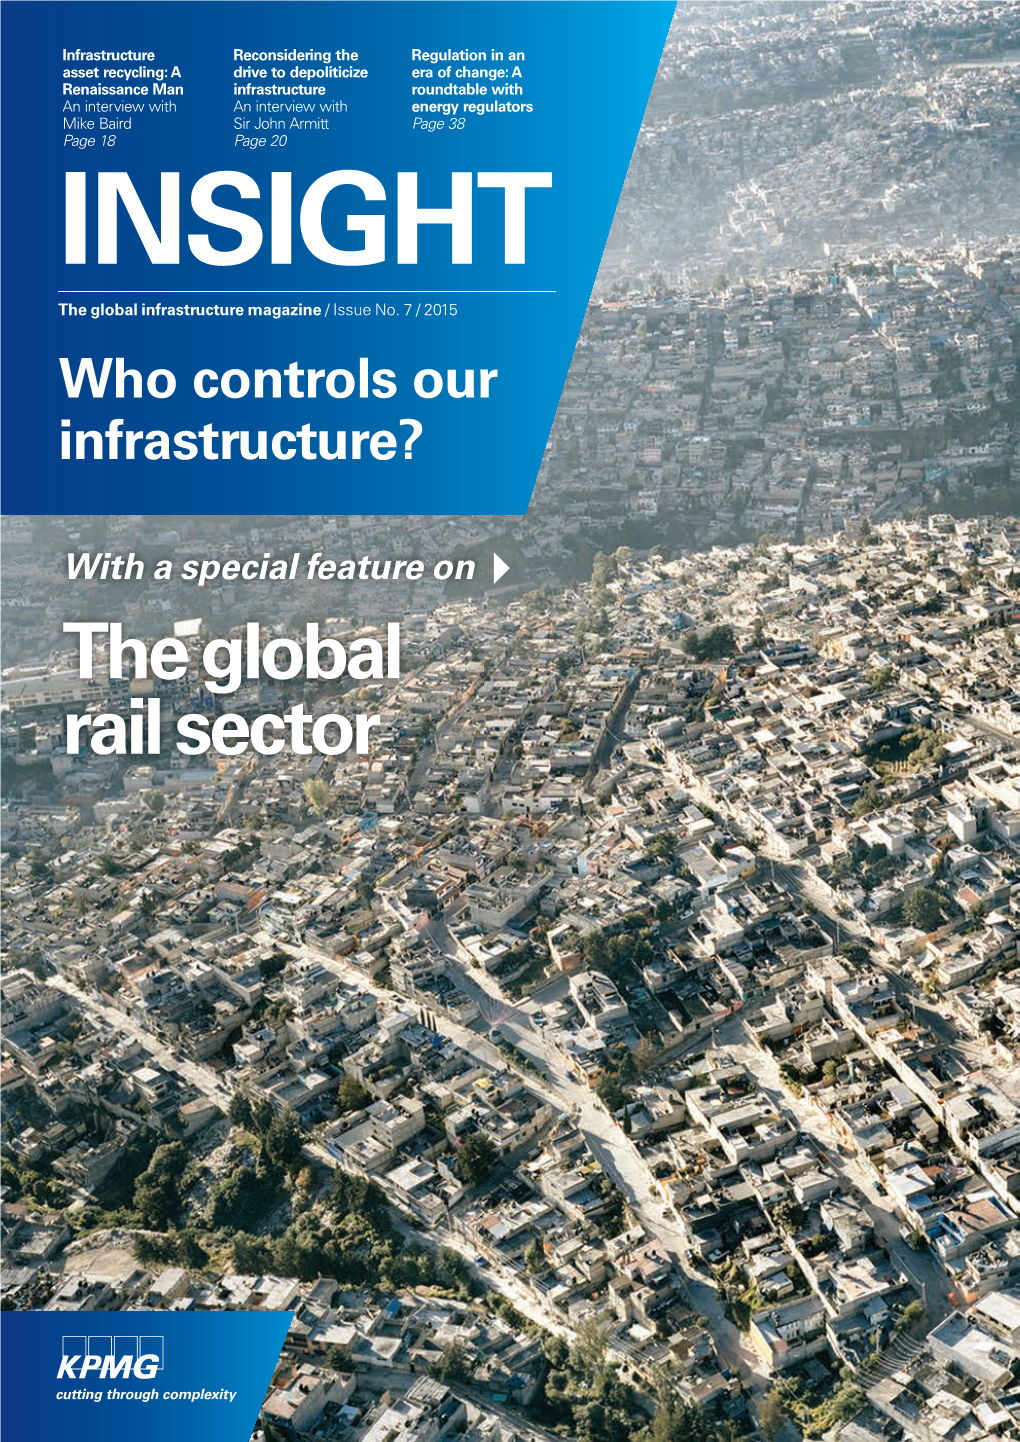 Insight: Who Controls Our Infrastructure? Editors: Peter Schram, Dane Wolfe, Laura Jablonski and Pranya Yamin